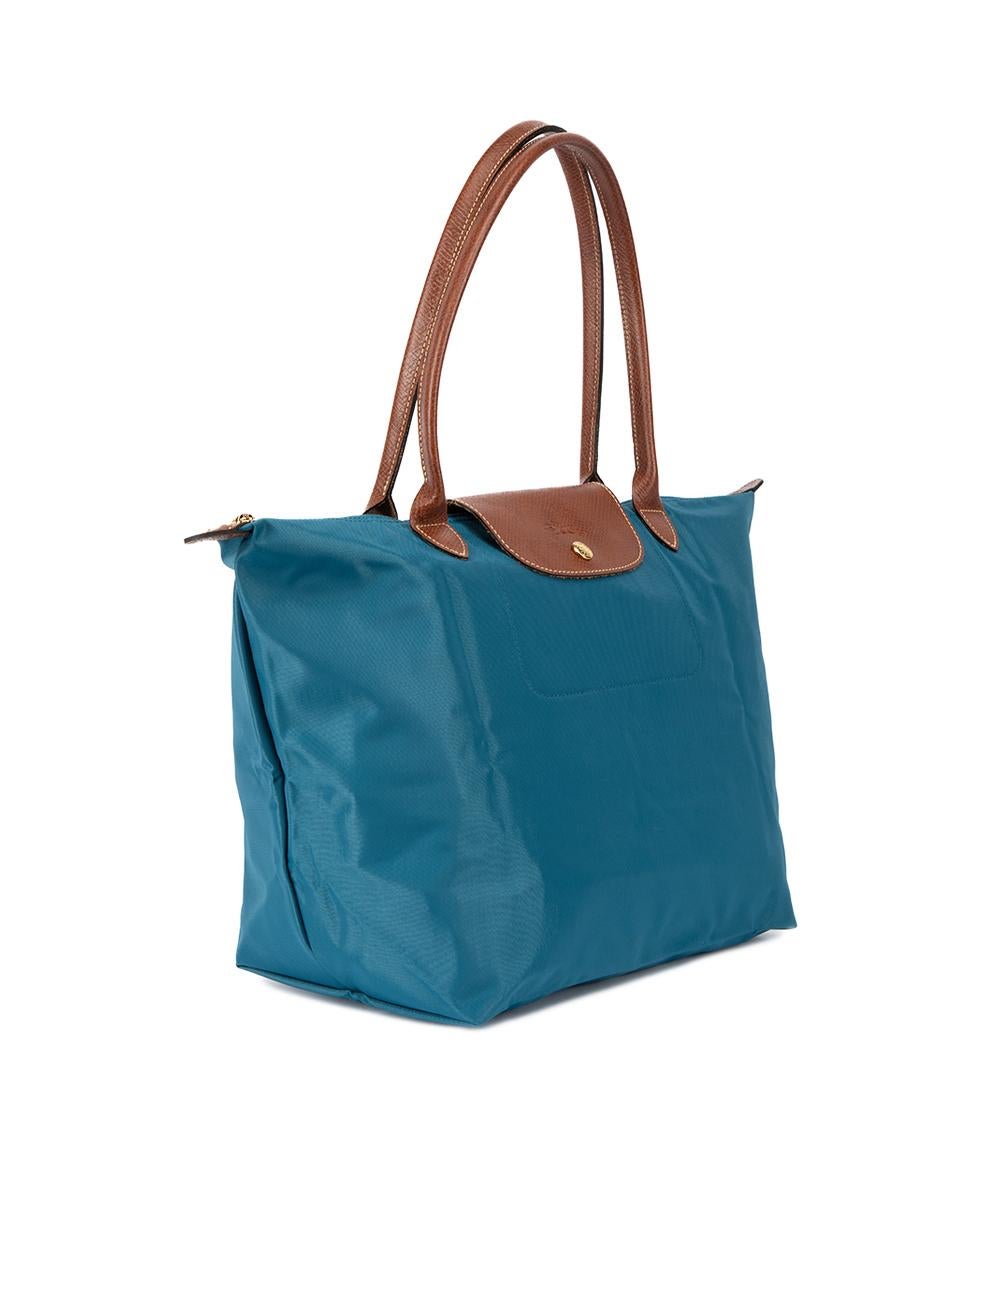 CONDITION is Never Worn. No visible wear to bag is evident on this used Longchamp designer resale item. Details Peacock blue Nylon Large tote bag Collapsible with snap button closure Brown leather trims 2x Rolled top handle Top snap button and top